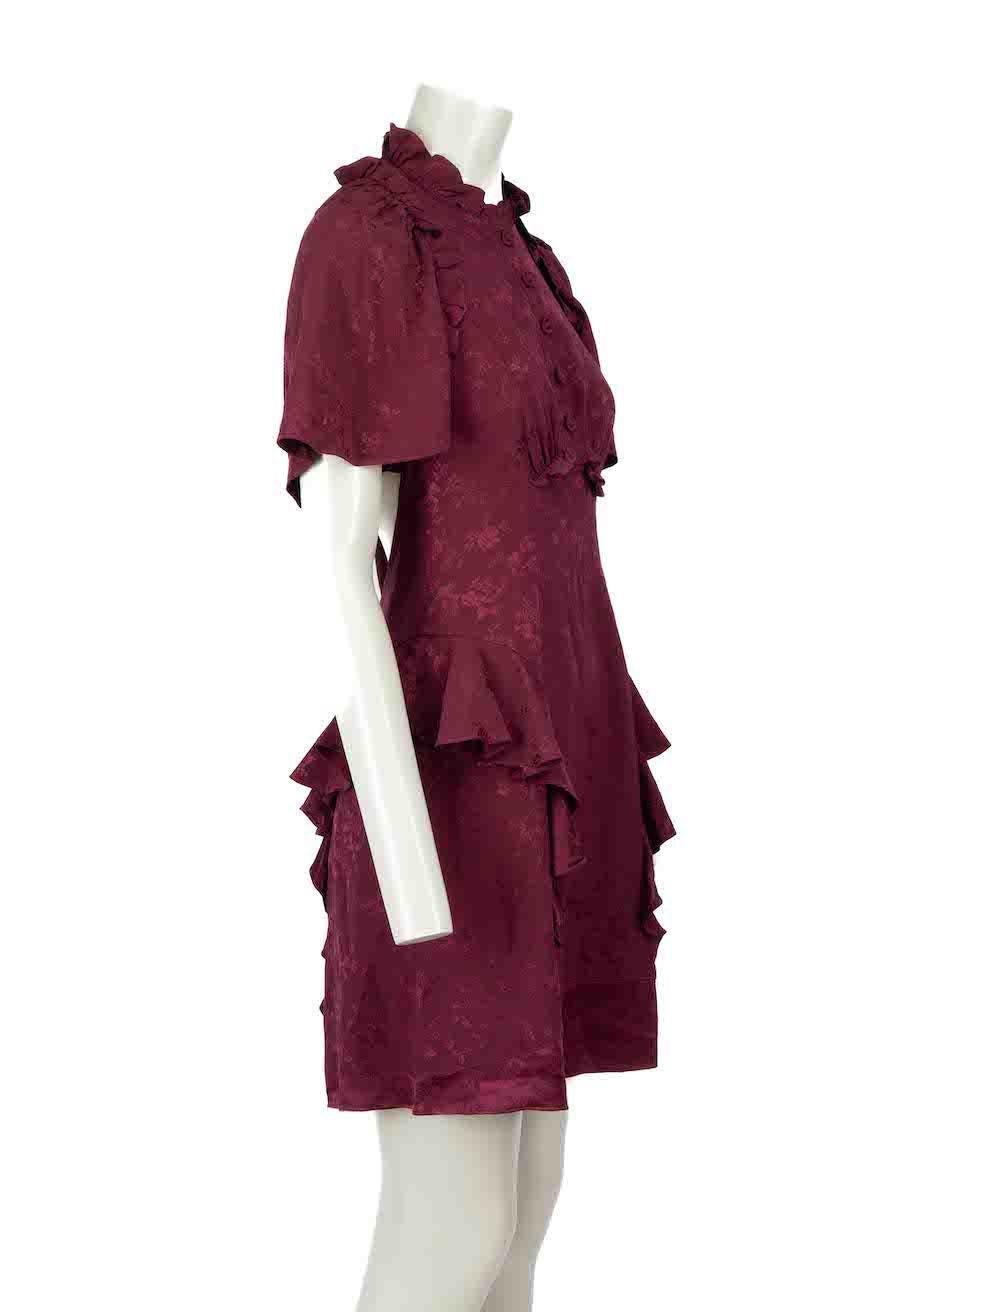 CONDITION is Never worn. No visible wear to dress is evident on this new Mayle designer resale item.

Details
Burgundy
Silk
Mini dress
Floral jacquard pattern
Round neckline
Open back
Front and back button up closure
Ruffles accent

Made in China